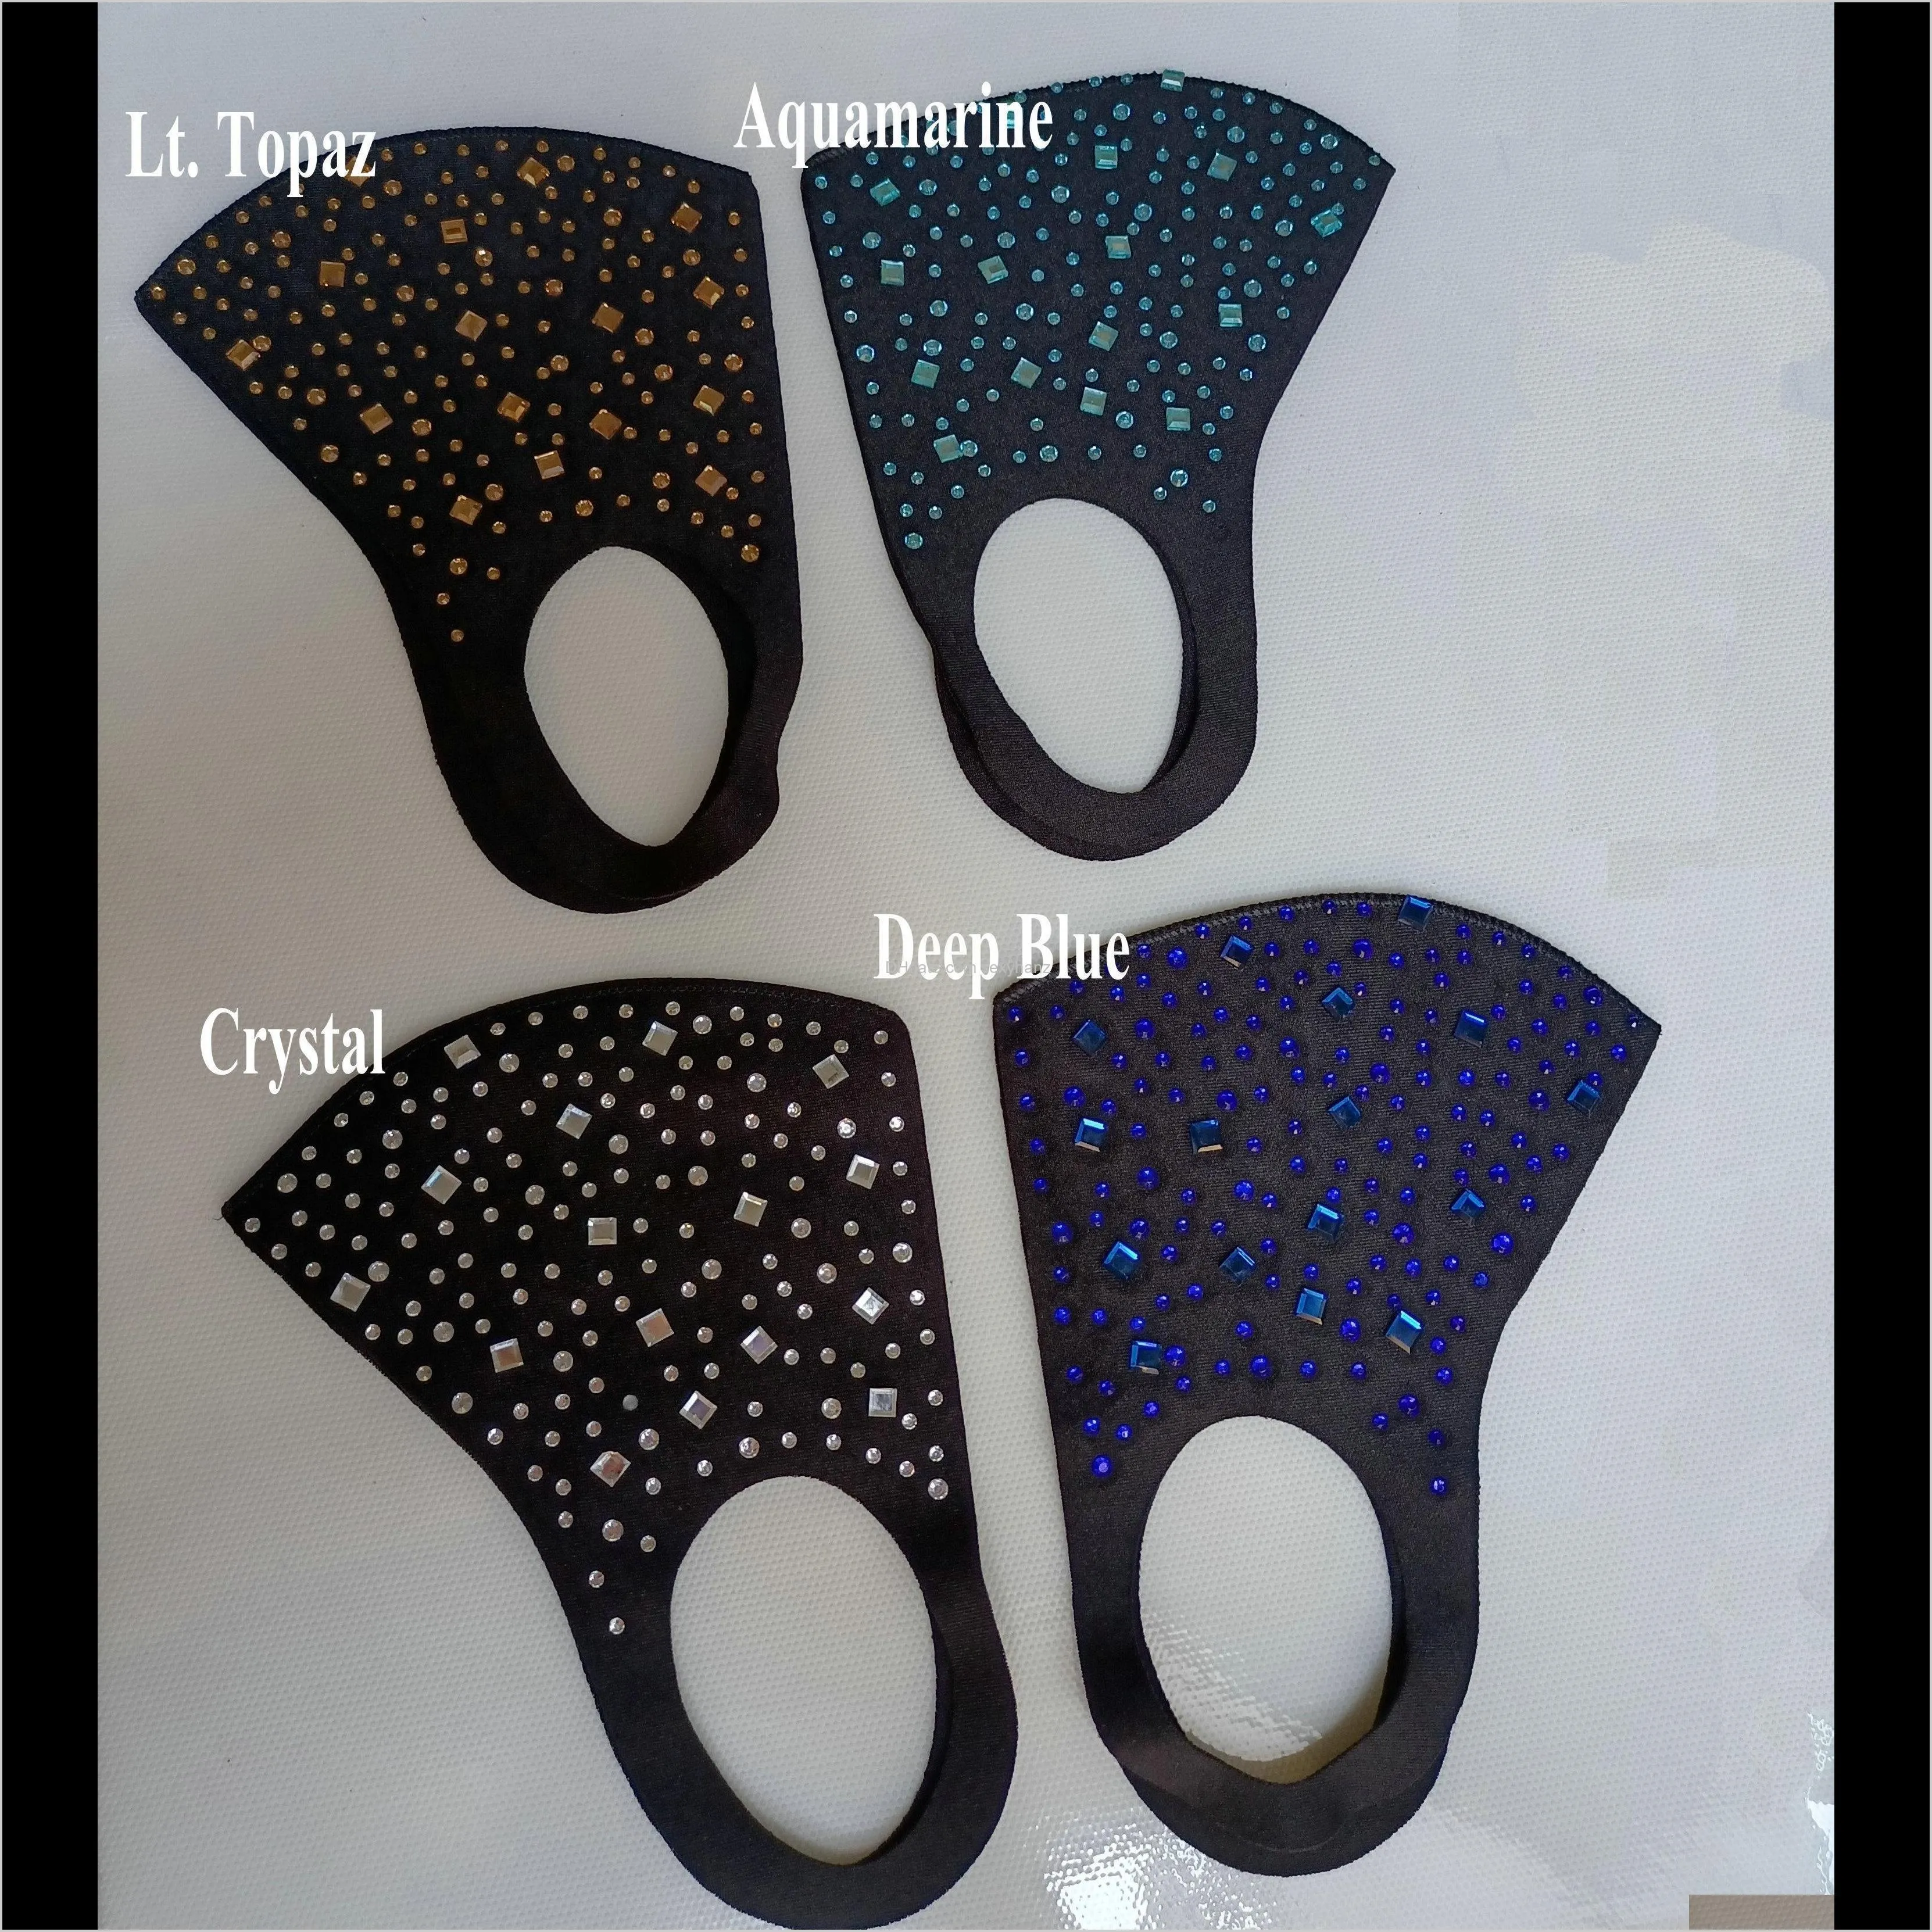 11x11cm hotfix rhinestone iron on transfer star with glass squares motif sticker new for face mask